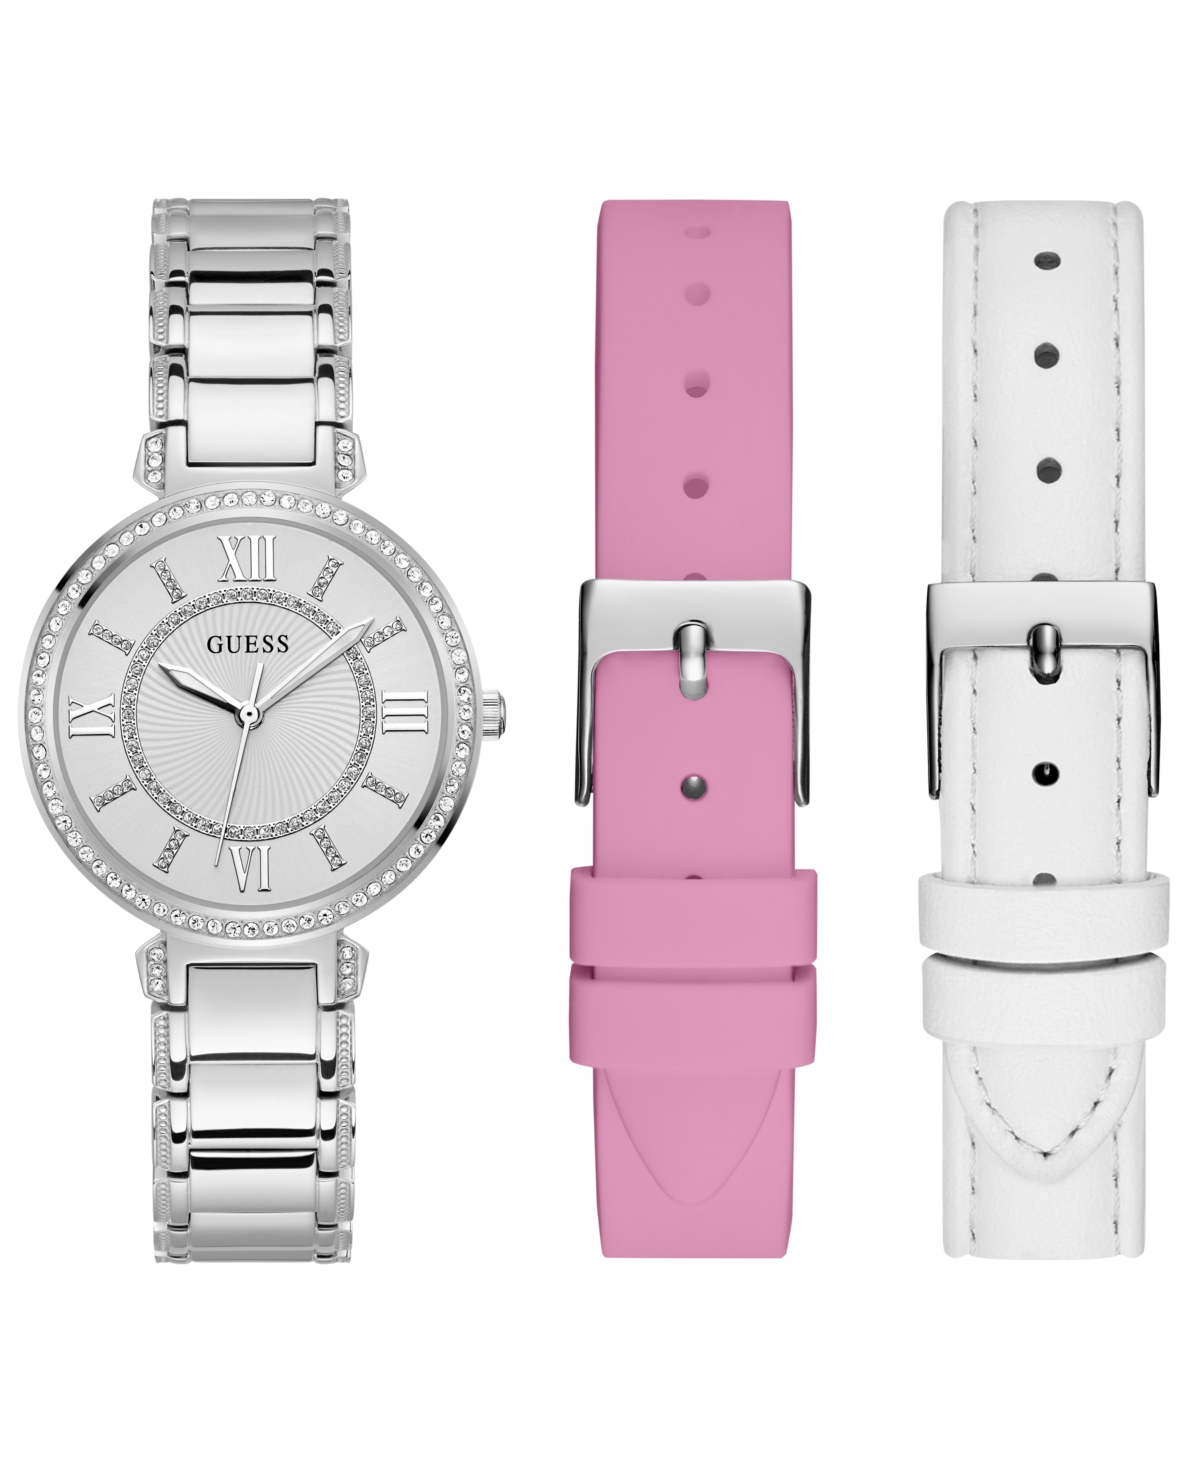 Guess Women's Analog Silver-tone Stainless Steel Watch With Pink, White Suede And Leather Strap Gift Set 3 In Silver Tone